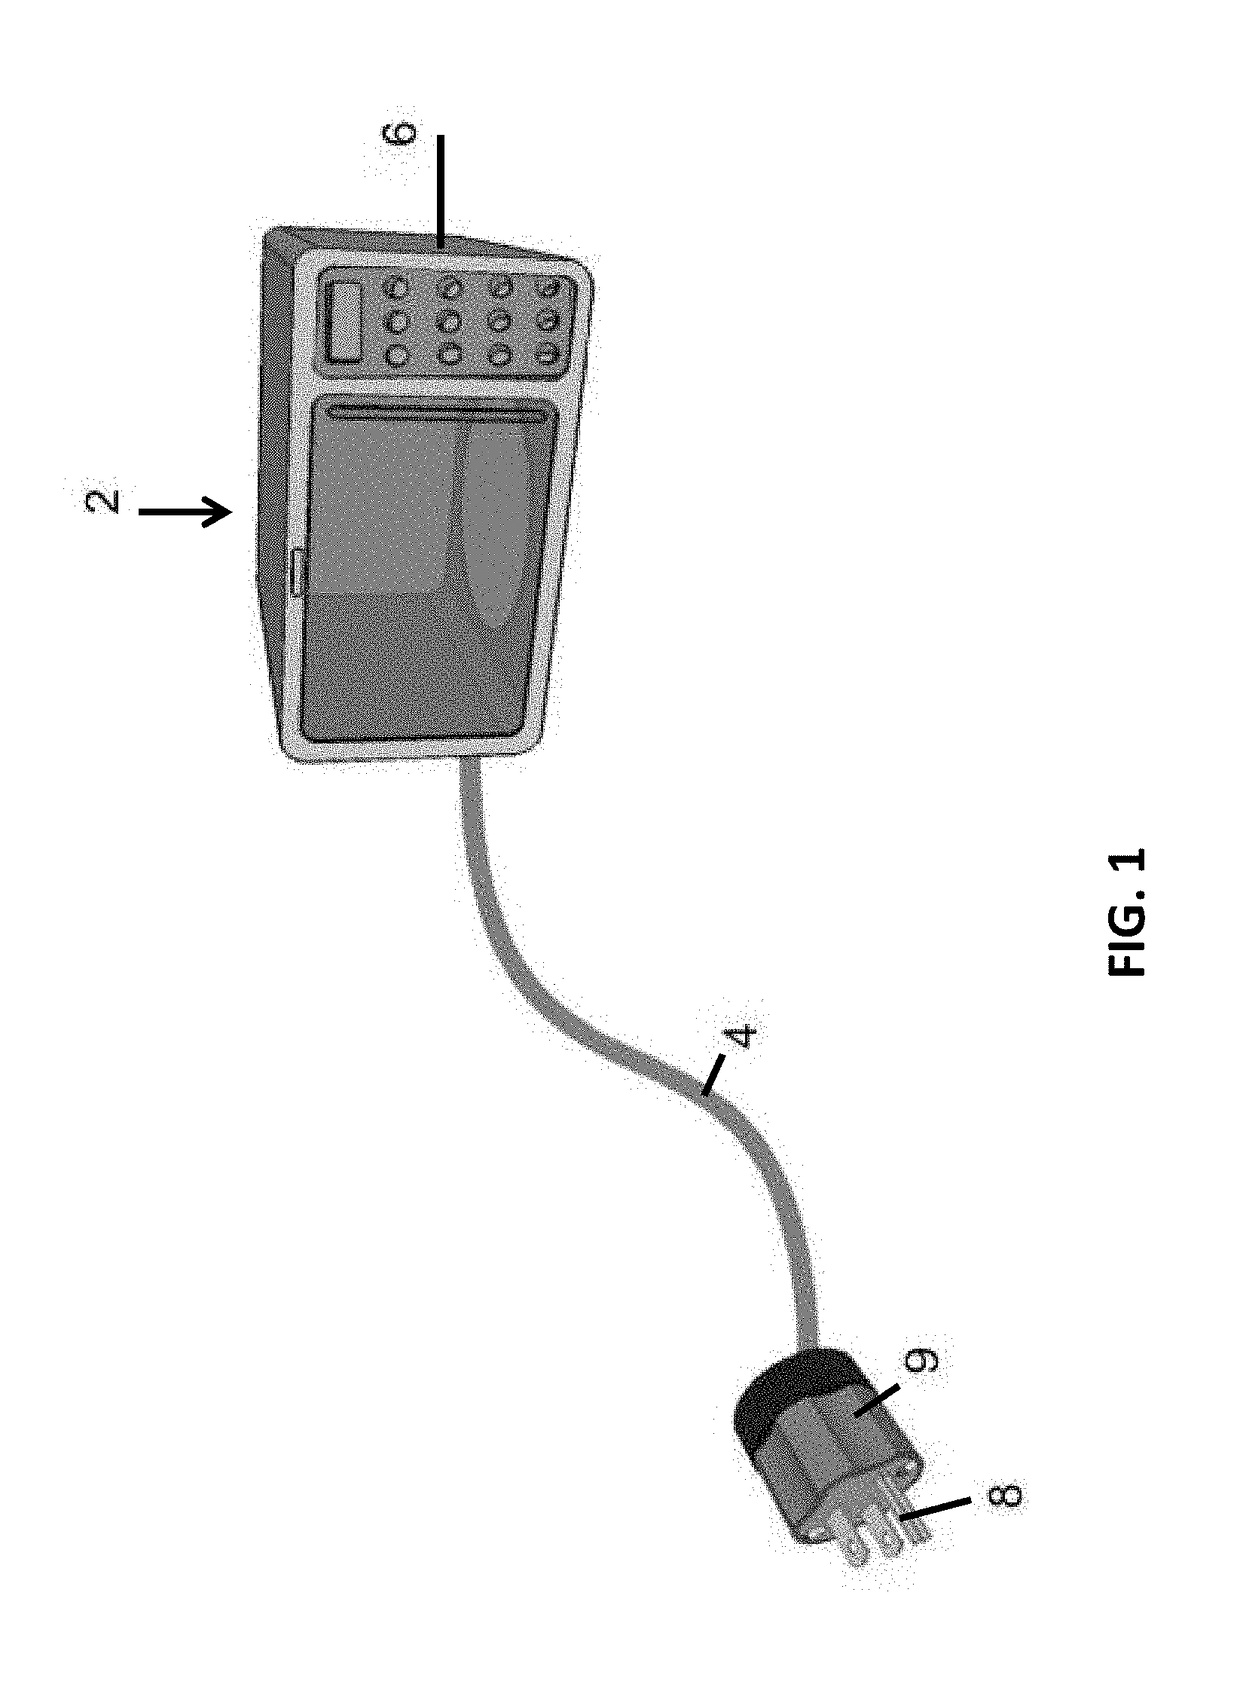 Systems and methods for communication between devices and remote systems with a power cord